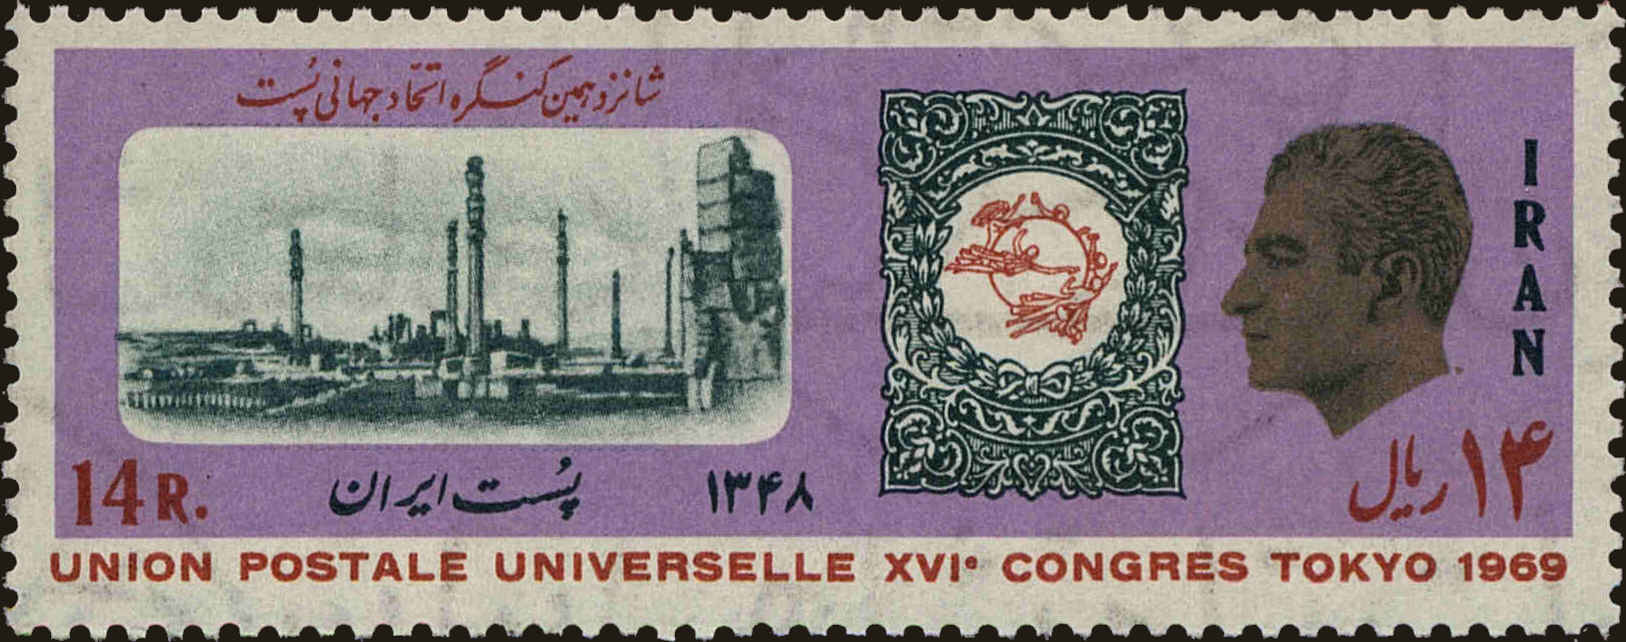 Front view of Iran 1523 collectors stamp